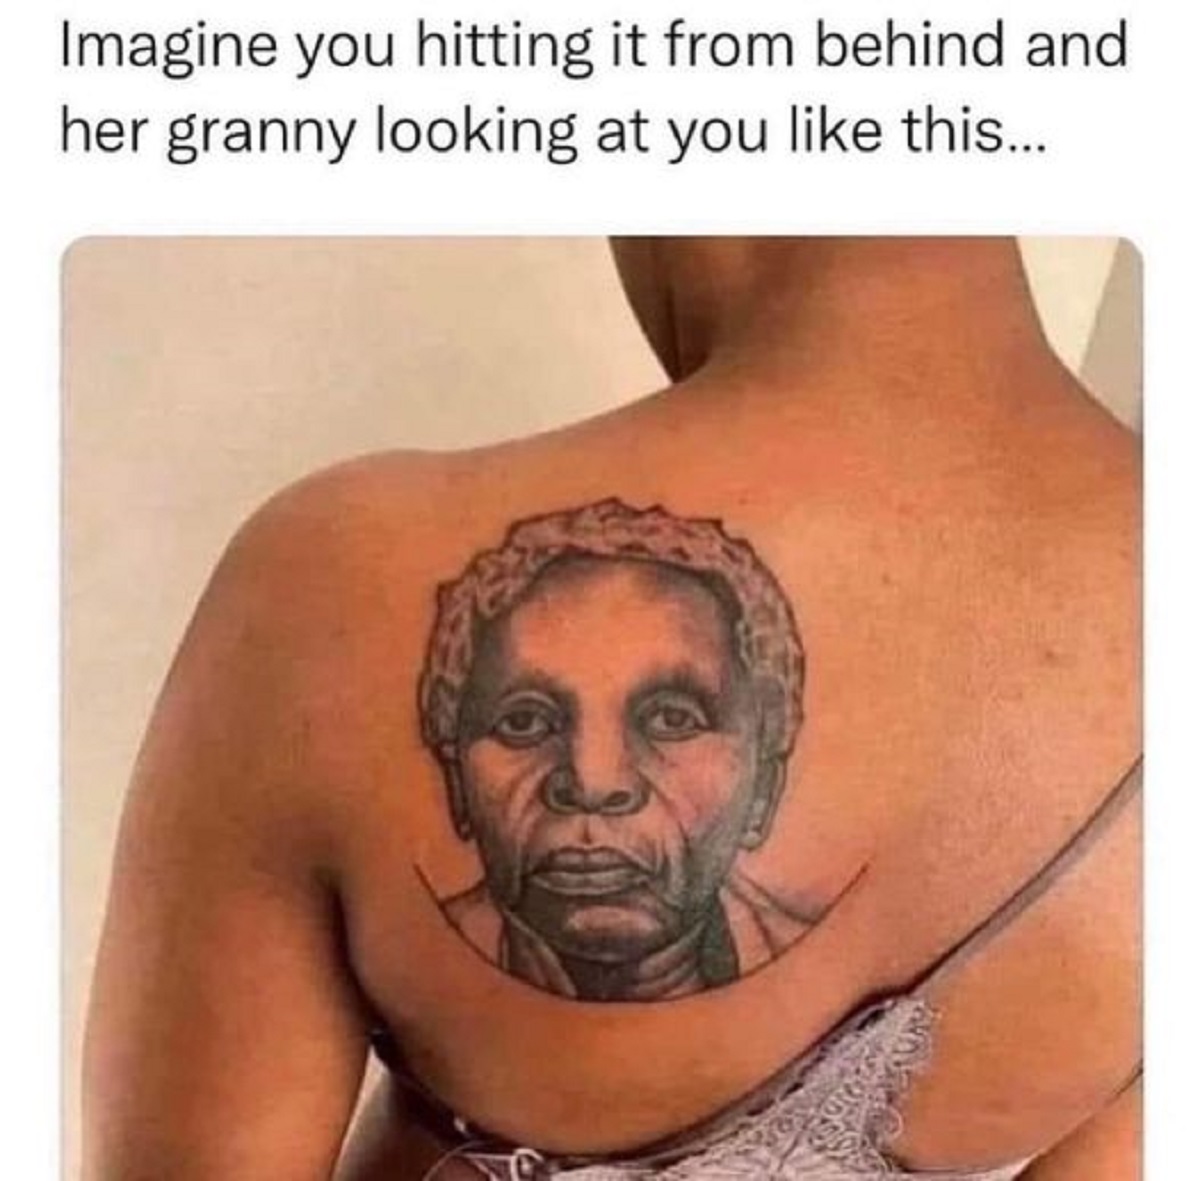 spicy memes - grandma tattoo on back meme - Imagine you hitting it from behind and her granny looking at you this...